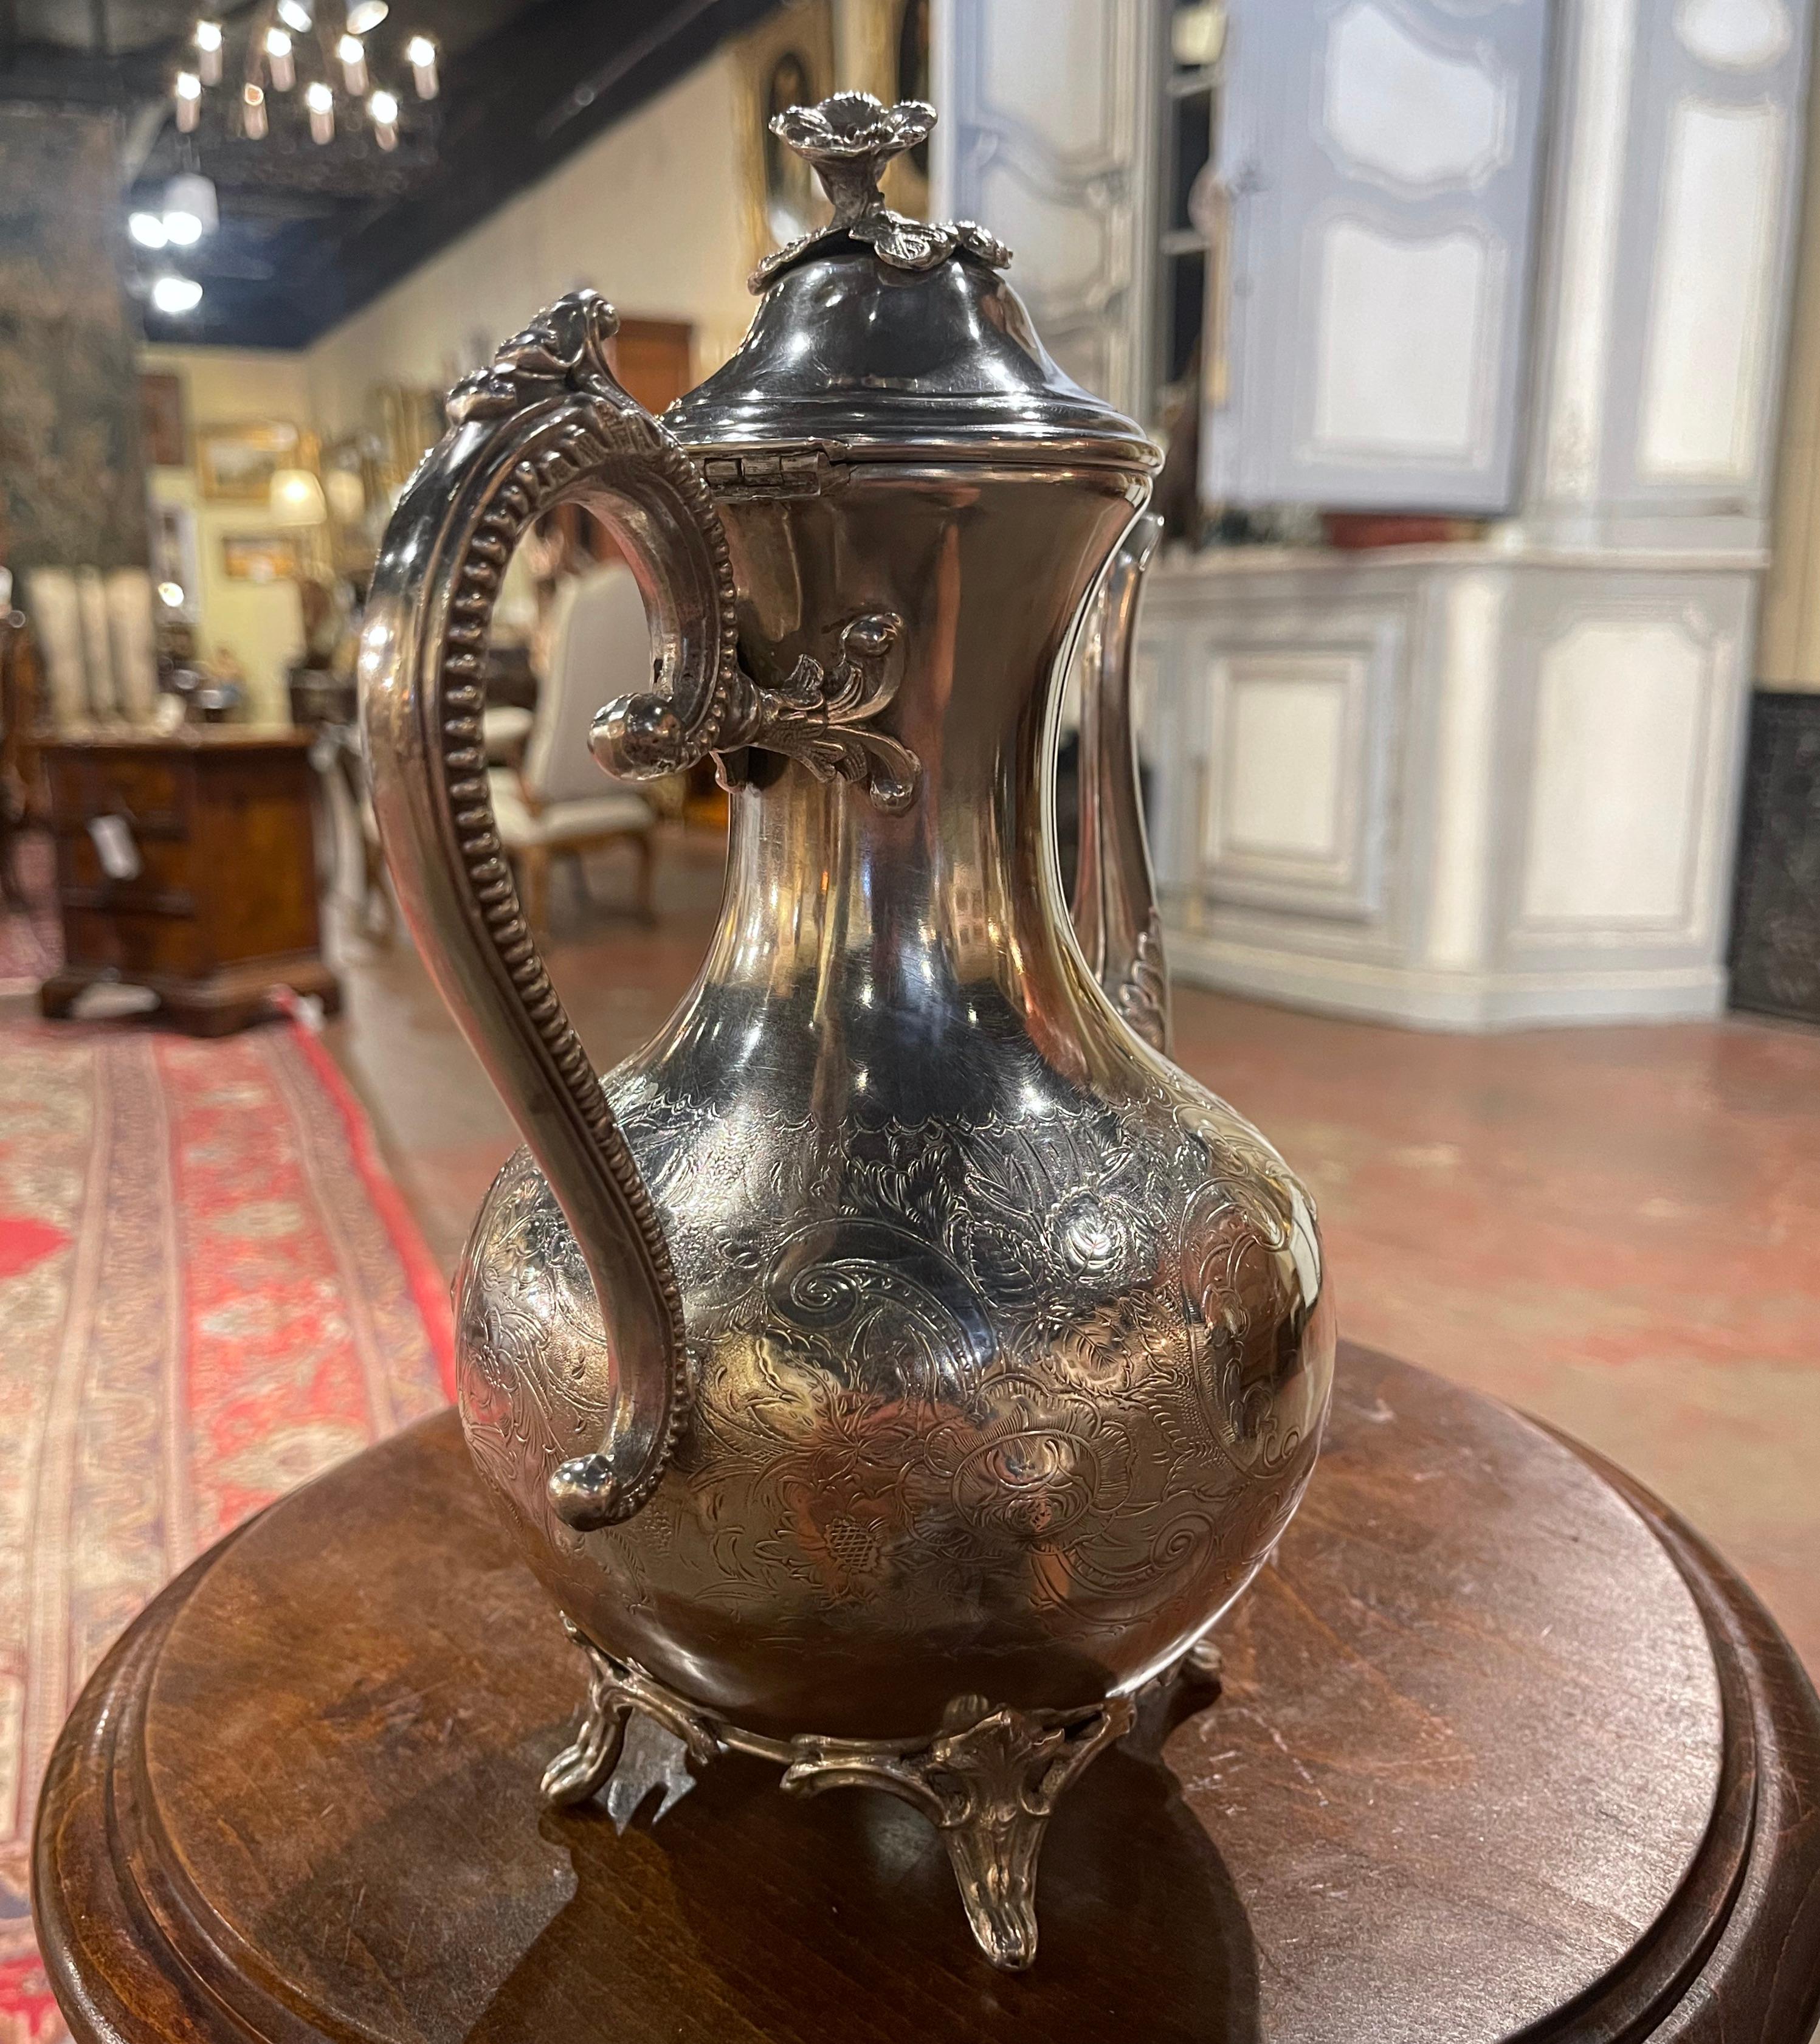 Early 20th Century French Silver Plated Teapot or Coffeepot with Engraved Motifs In Excellent Condition For Sale In Dallas, TX